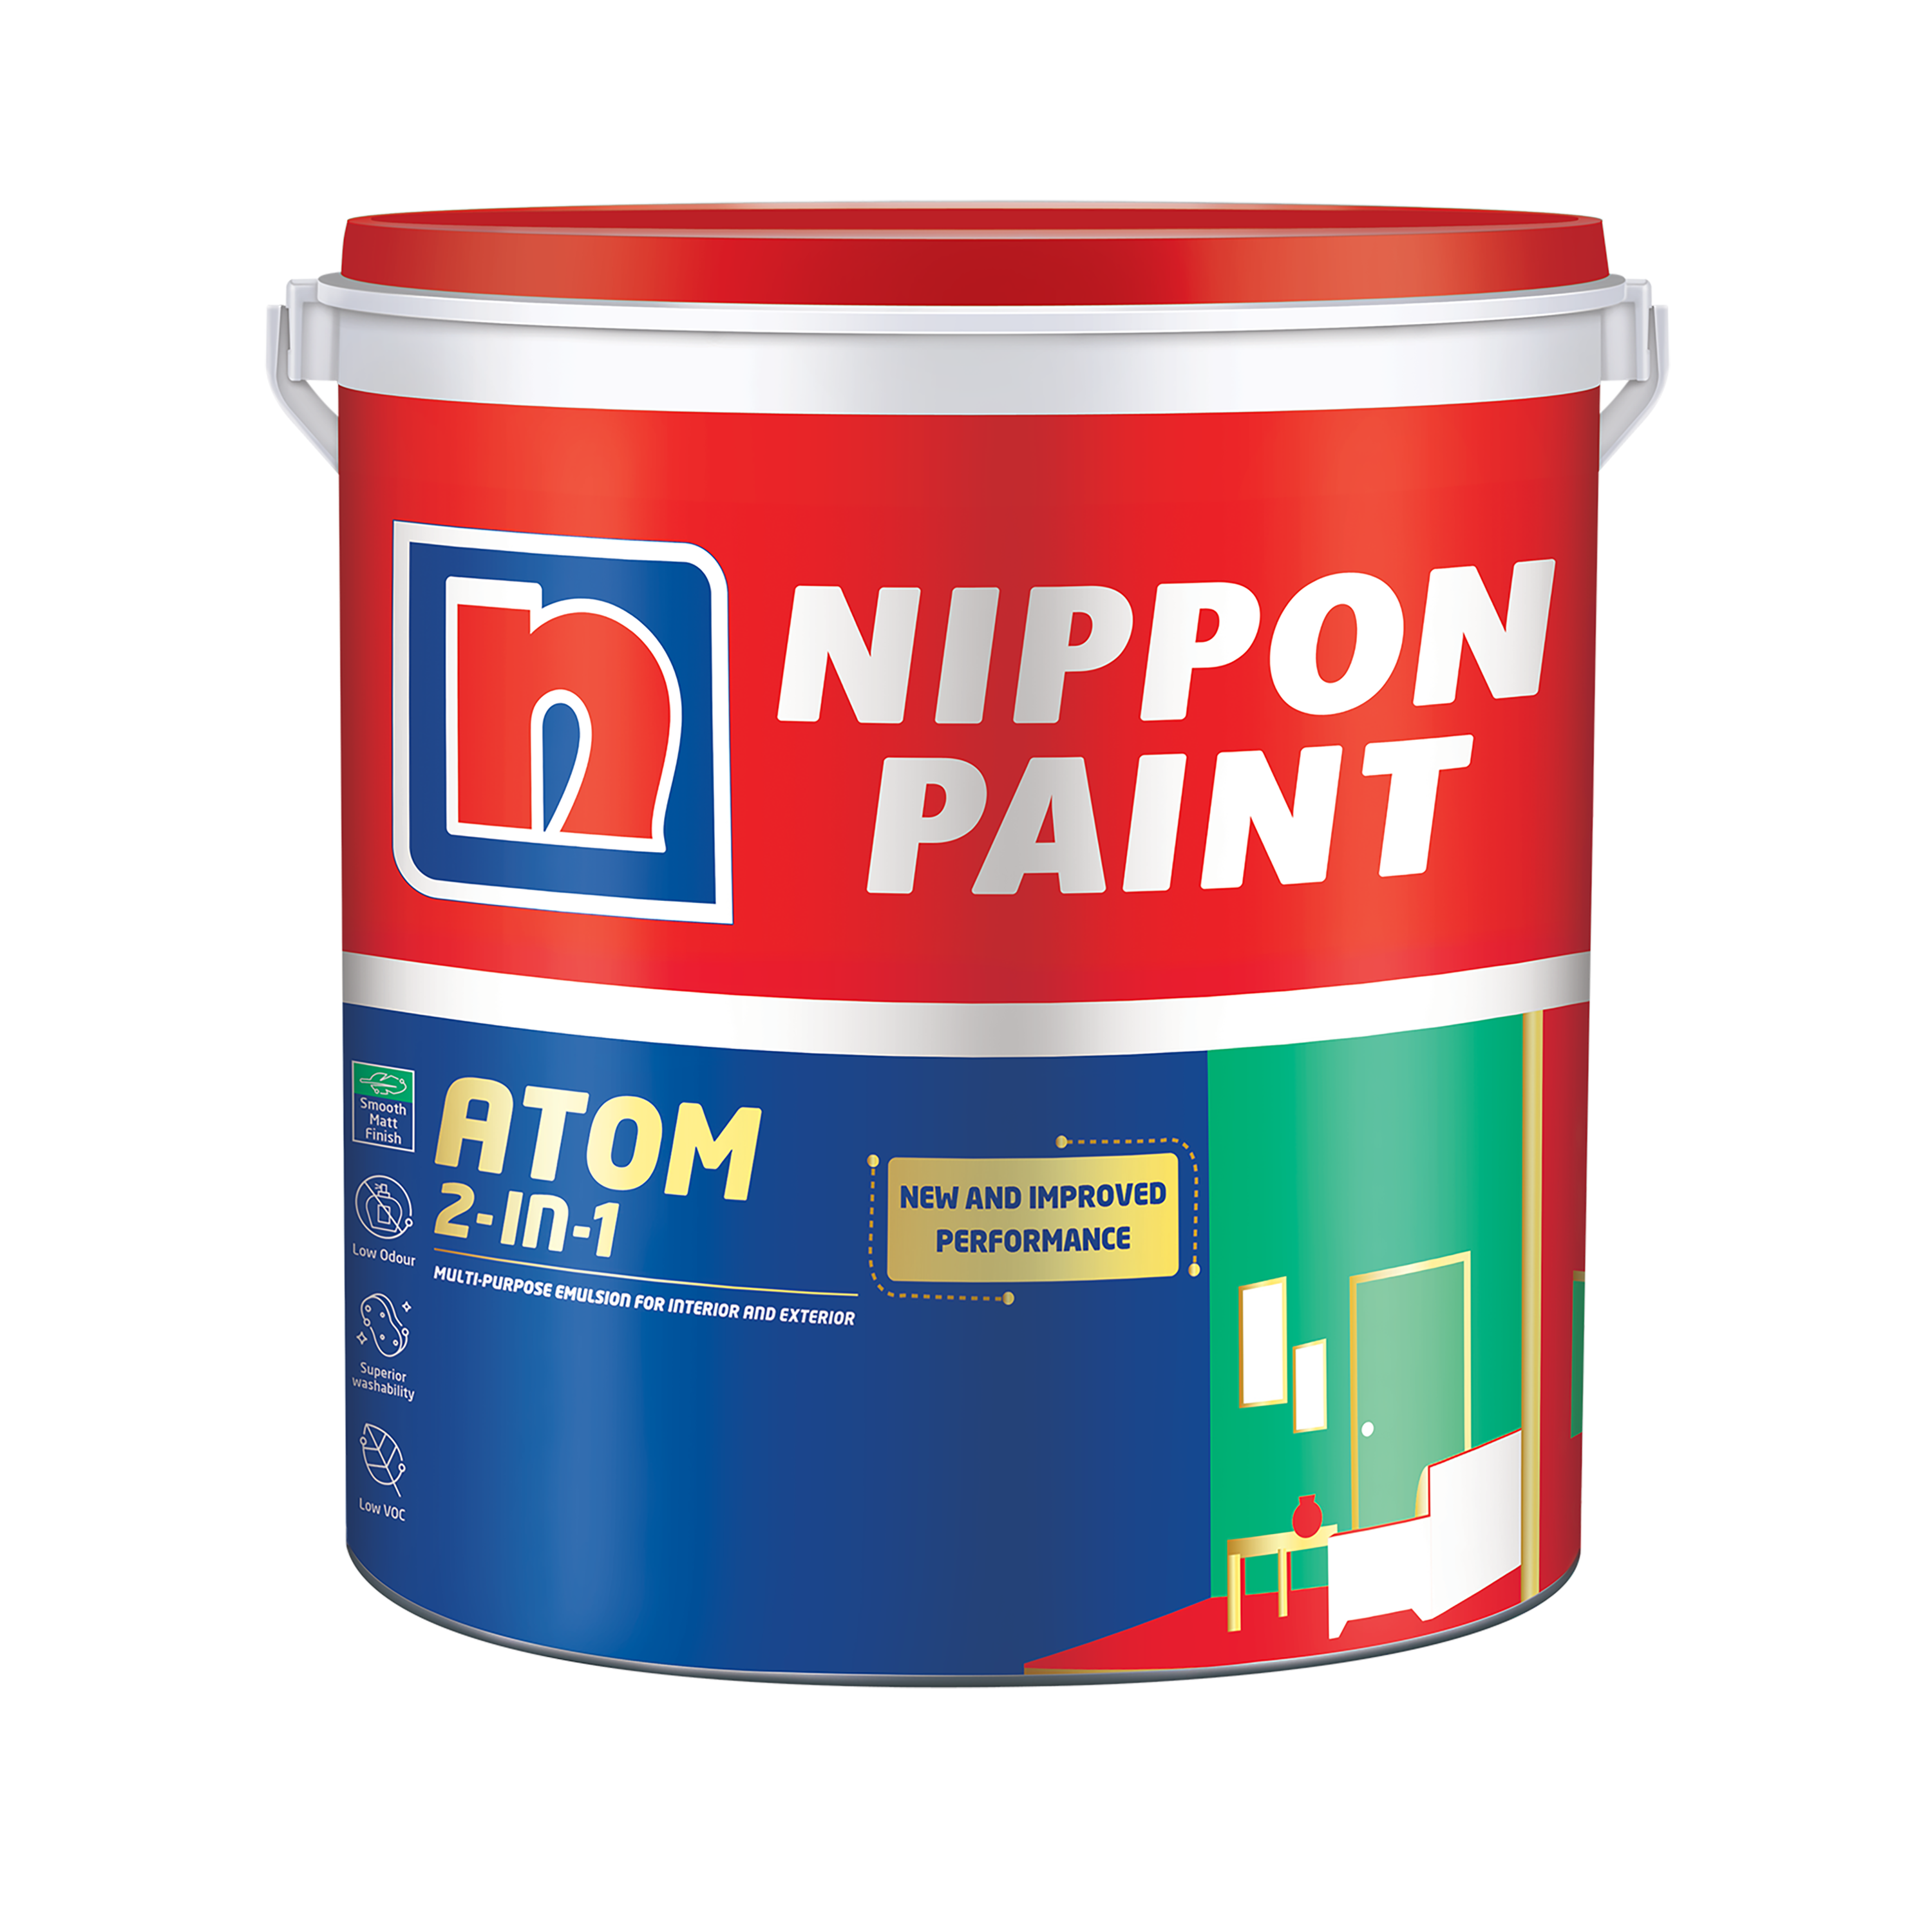 nippon paint atom 2 in 1 interior and exterior paint